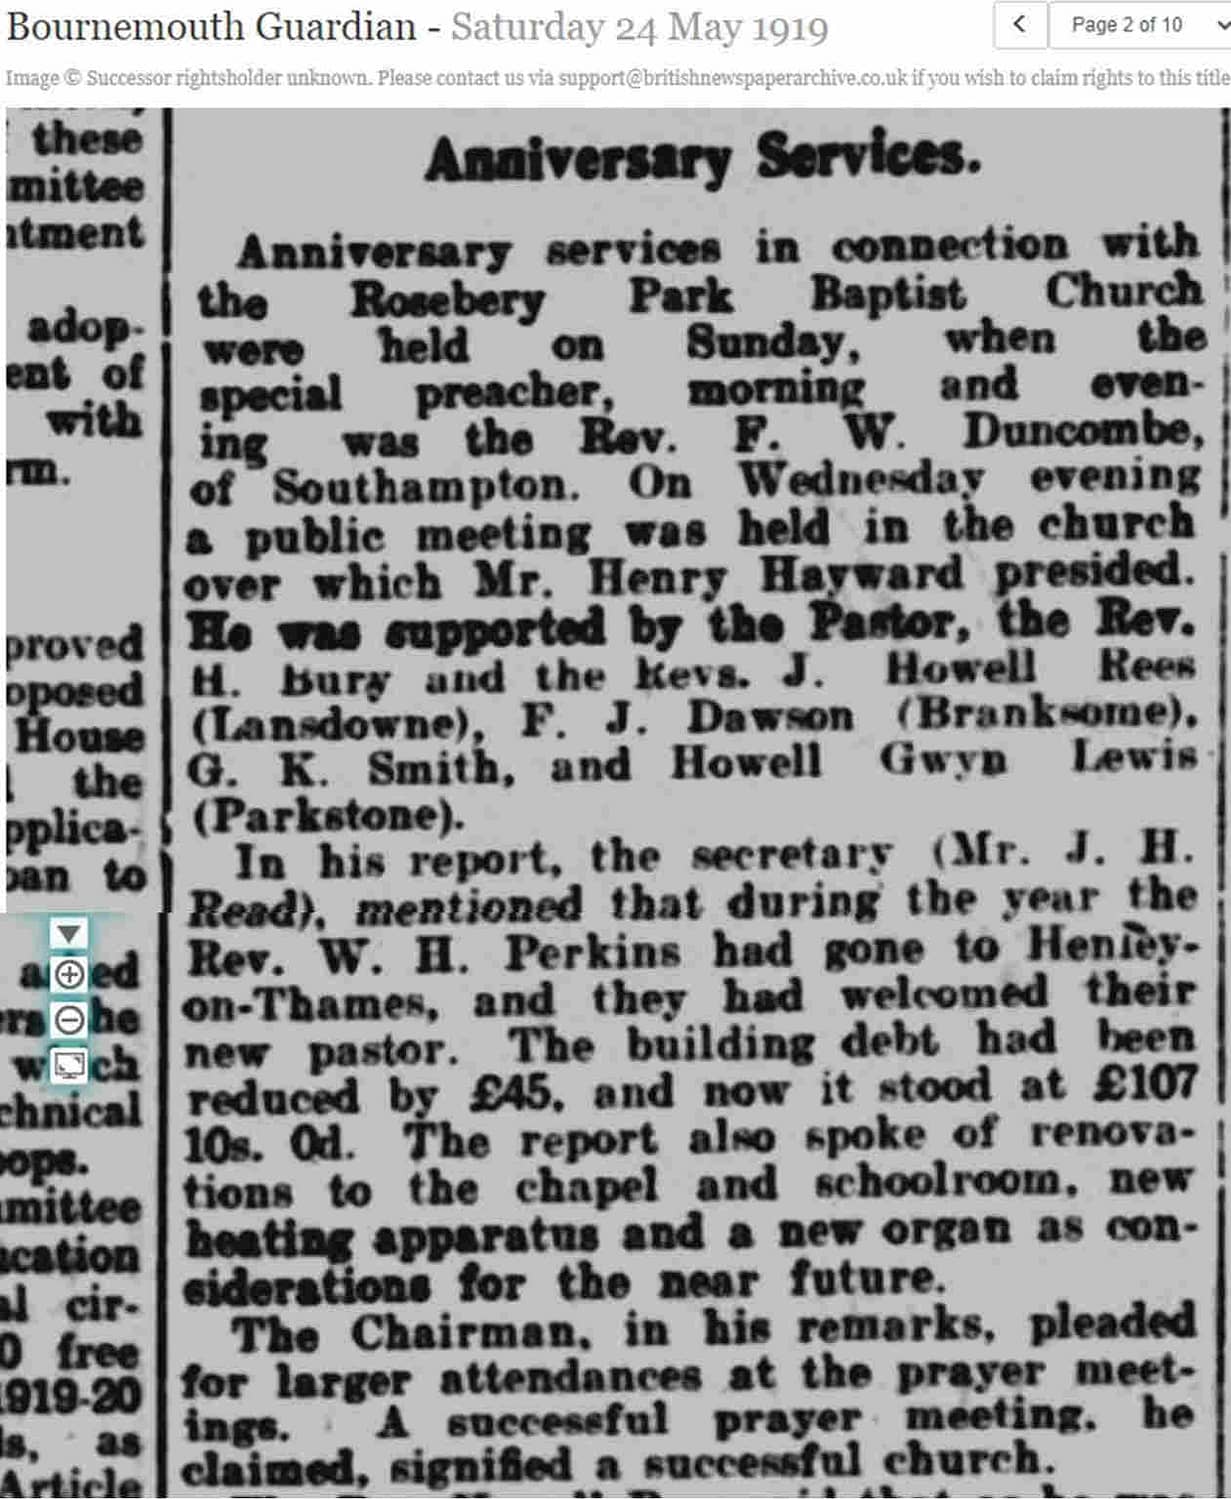 newspaper article Bournemouth Guardian May 1919 about Rosebery Park Baptist Church's anniversary.